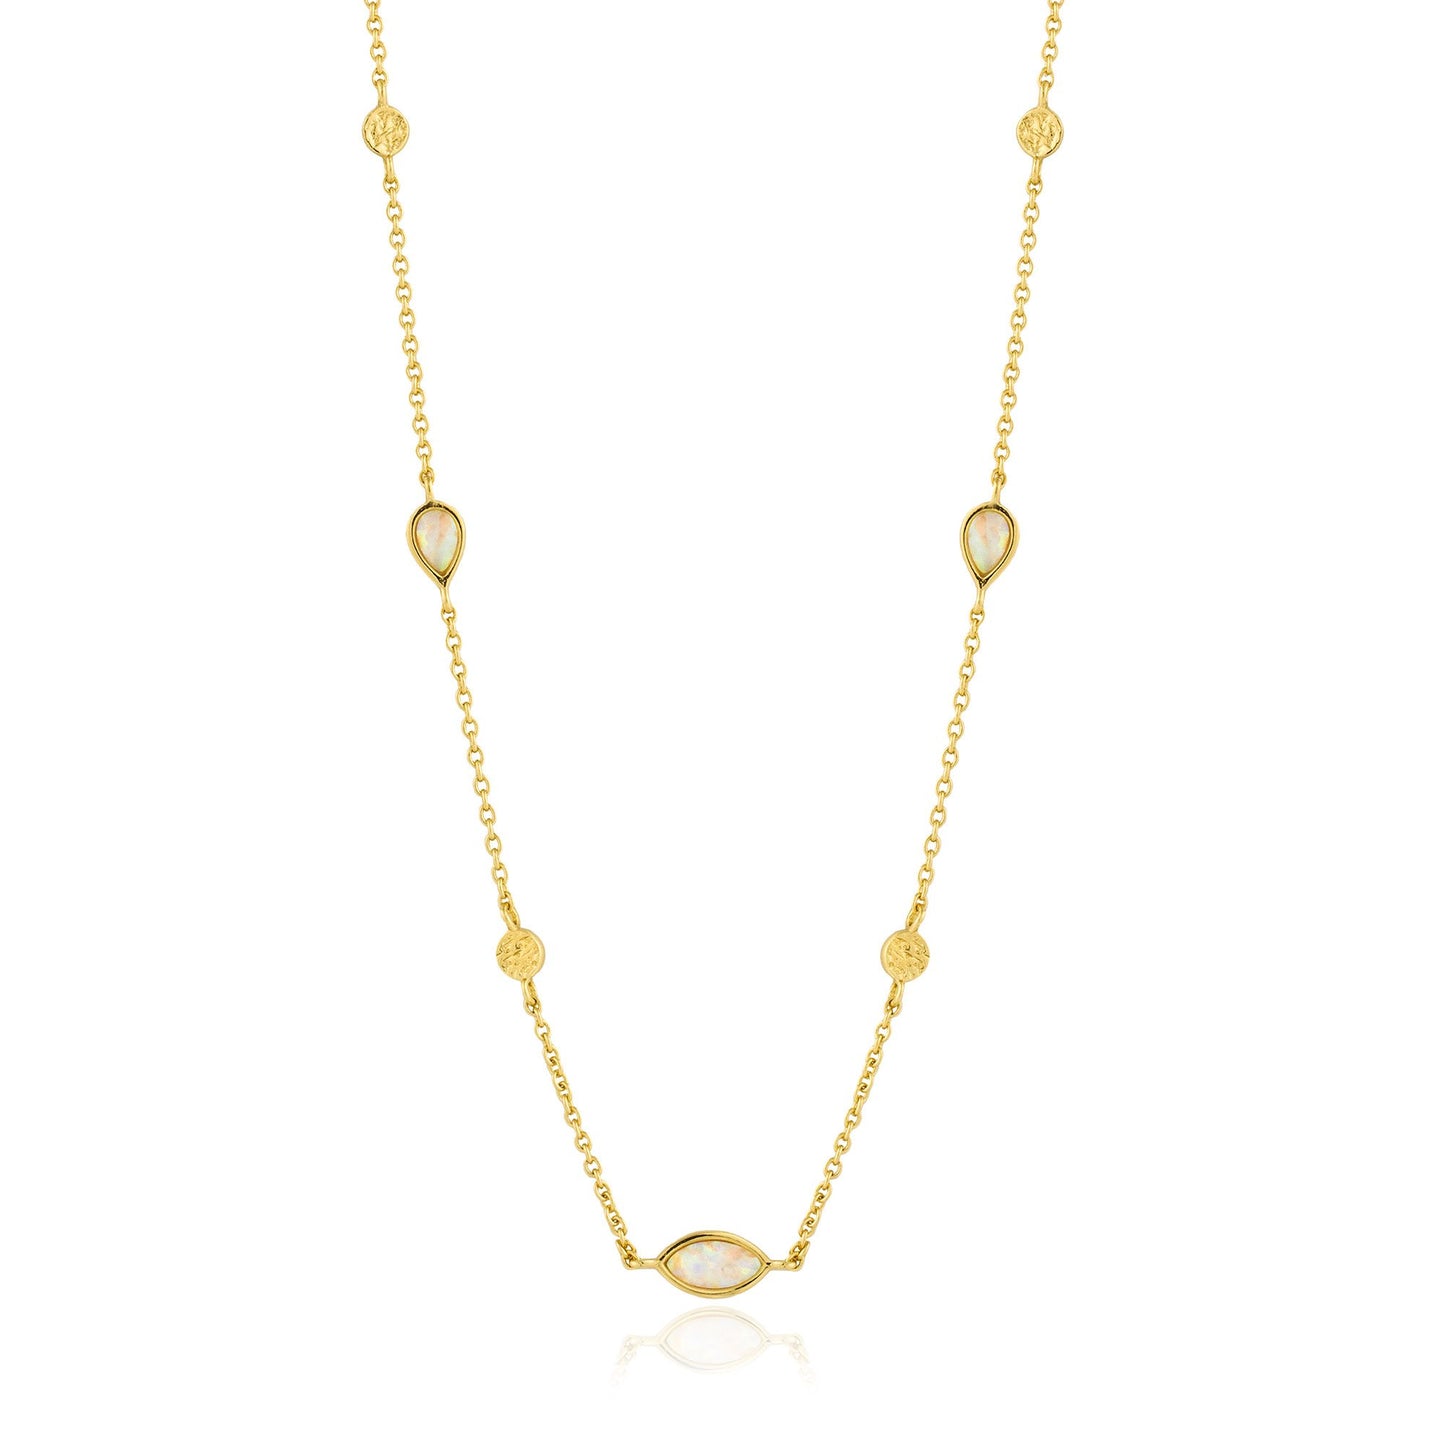 ANIA HAIE ANIA HAIE - Opal Color Gold Necklace available at The Good Life Boutique